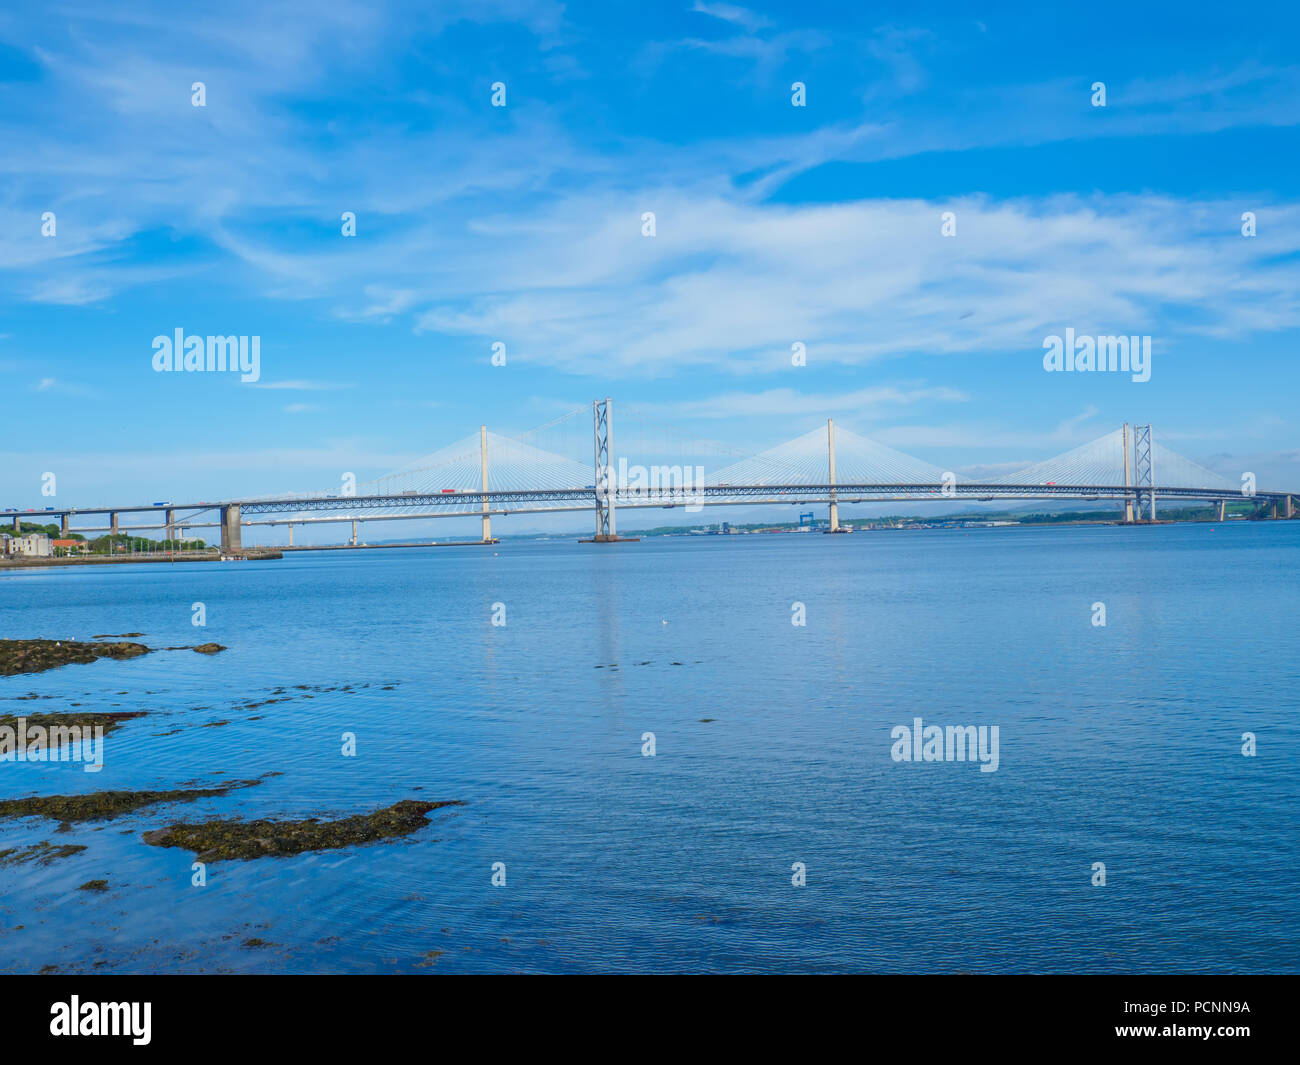 View of the Queensferry Crossing bridges over the Firth of Forth, Edinburgh, Scotland, UK. Stock Photo